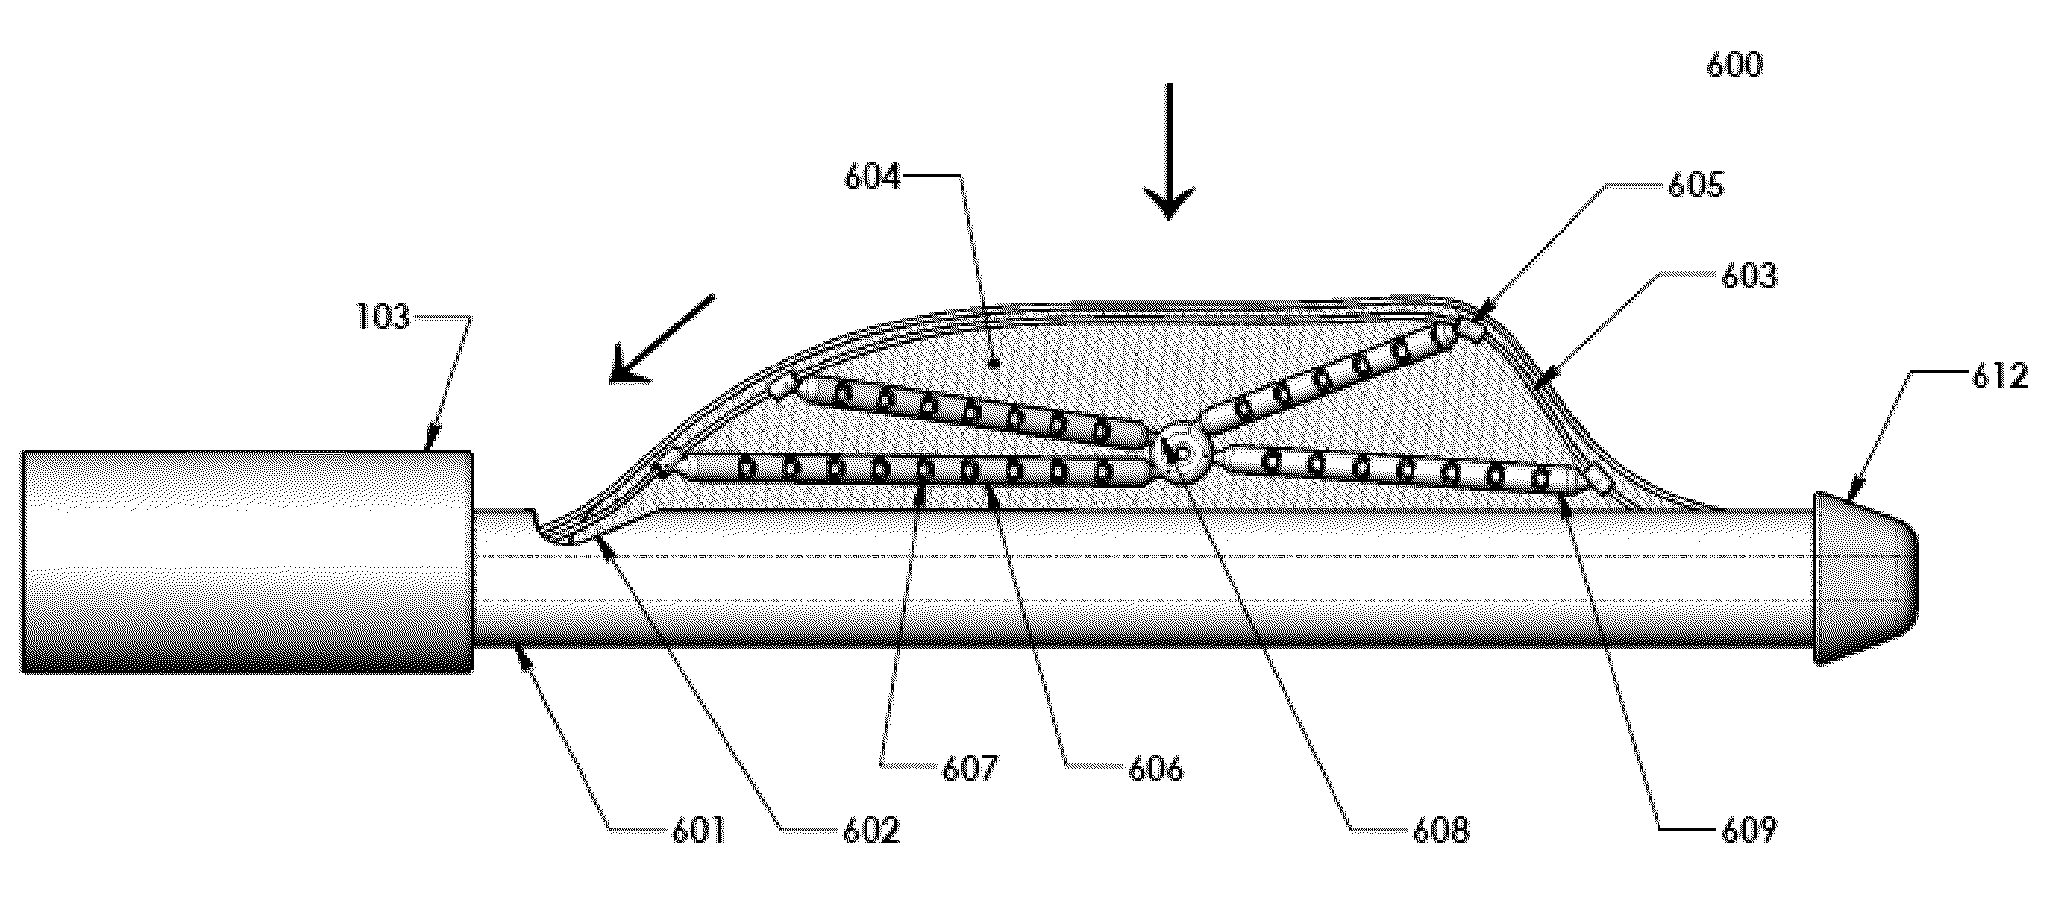 Endoscopic system for lung biopsy and biopsy method of insufflating gas to collapse a lung